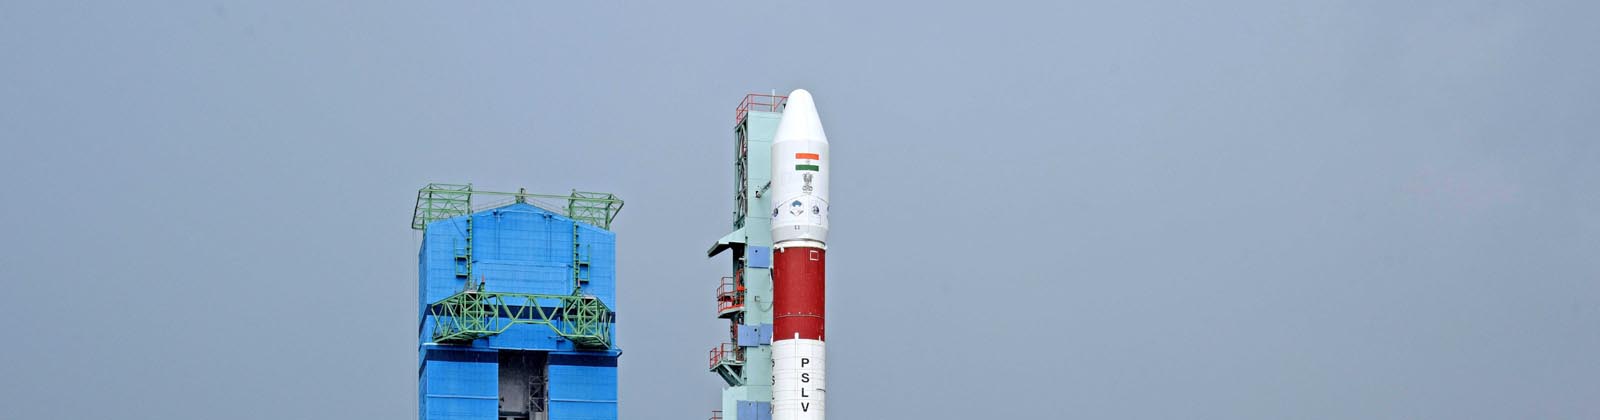 pslv eos-1